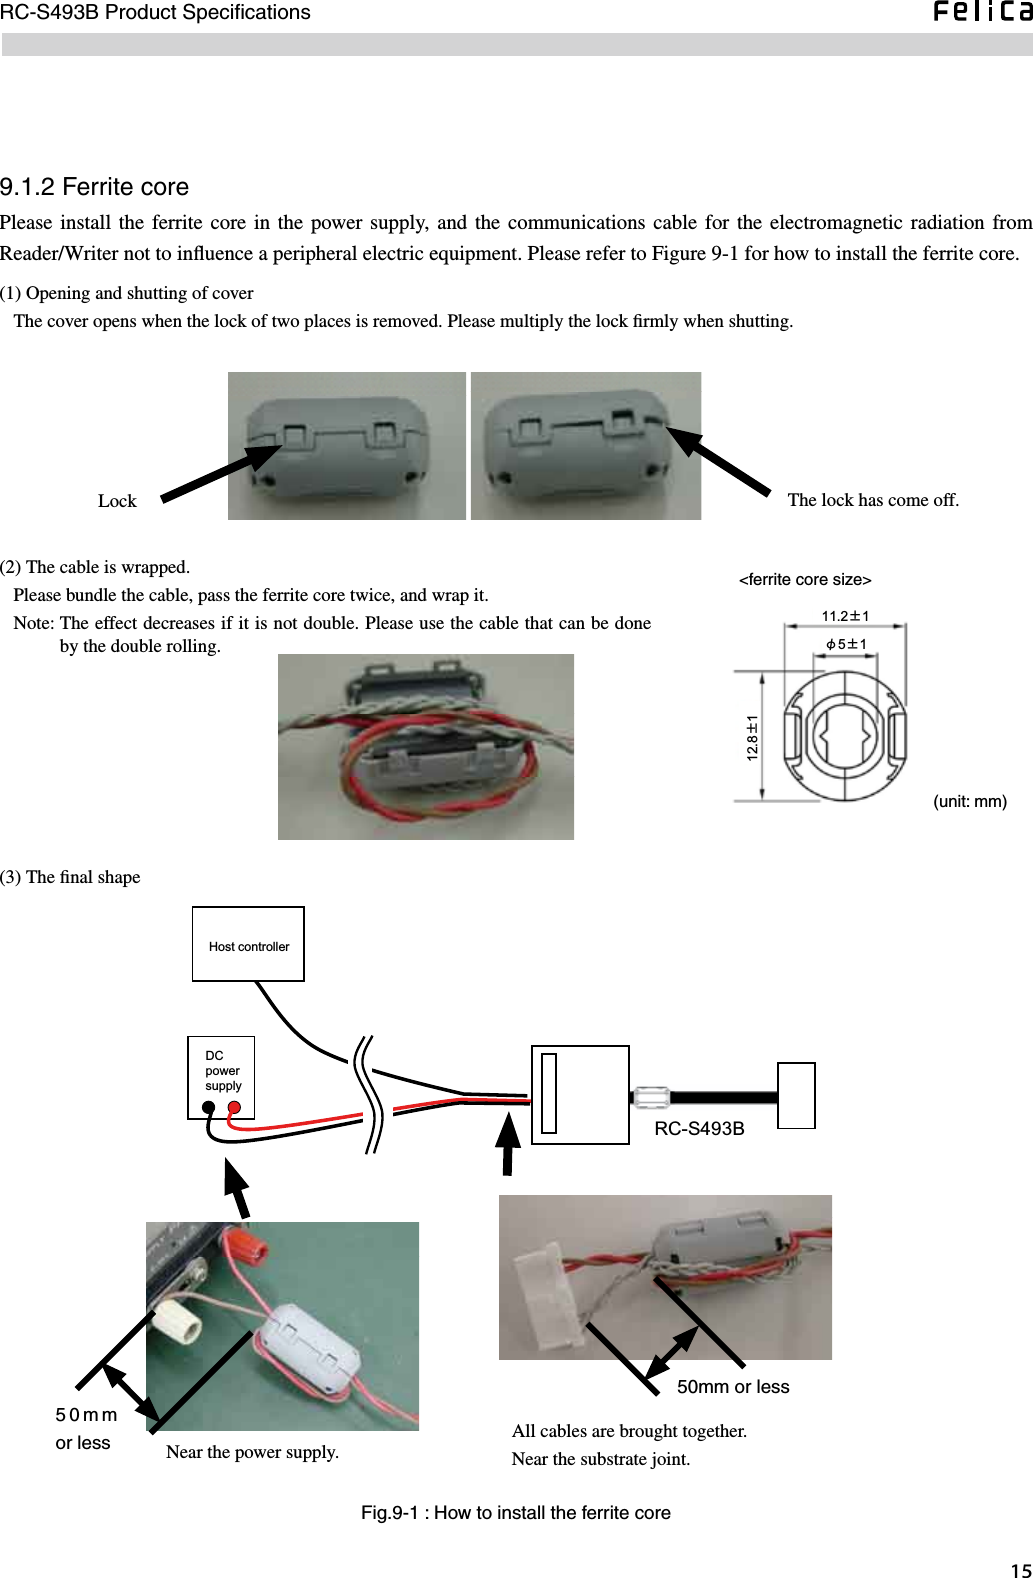 15RC-S493B Product SpeciﬁcationsFig.9-1 : How to install the ferrite core(1) Opening and shutting of cover   The cover opens when the lock of two places is removed. Please multiply the lock ﬁrmly when shutting. Lock The lock has come off.(2) The cable is wrapped.   Please bundle the cable, pass the ferrite core twice, and wrap it.   Note:  The effect decreases if it is not double. Please use the cable that can be done by the double rolling. (3) The ﬁnal shape     (unit: mm)11.2±1φ5±112.8±1&lt;ferrite core size&gt;9.1.2 Ferrite corePlease install the  ferrite core  in  the power supply,  and the  communications cable for  the electromagnetic  radiation  from Reader/Writer not to inﬂuence a peripheral electric equipment. Please refer to Figure 9-1 for how to install the ferrite core.RC-S493BDCpowersupplyHost controllerNear the power supply.All cables are brought together.Near the substrate joint.50mm or less50mm or less